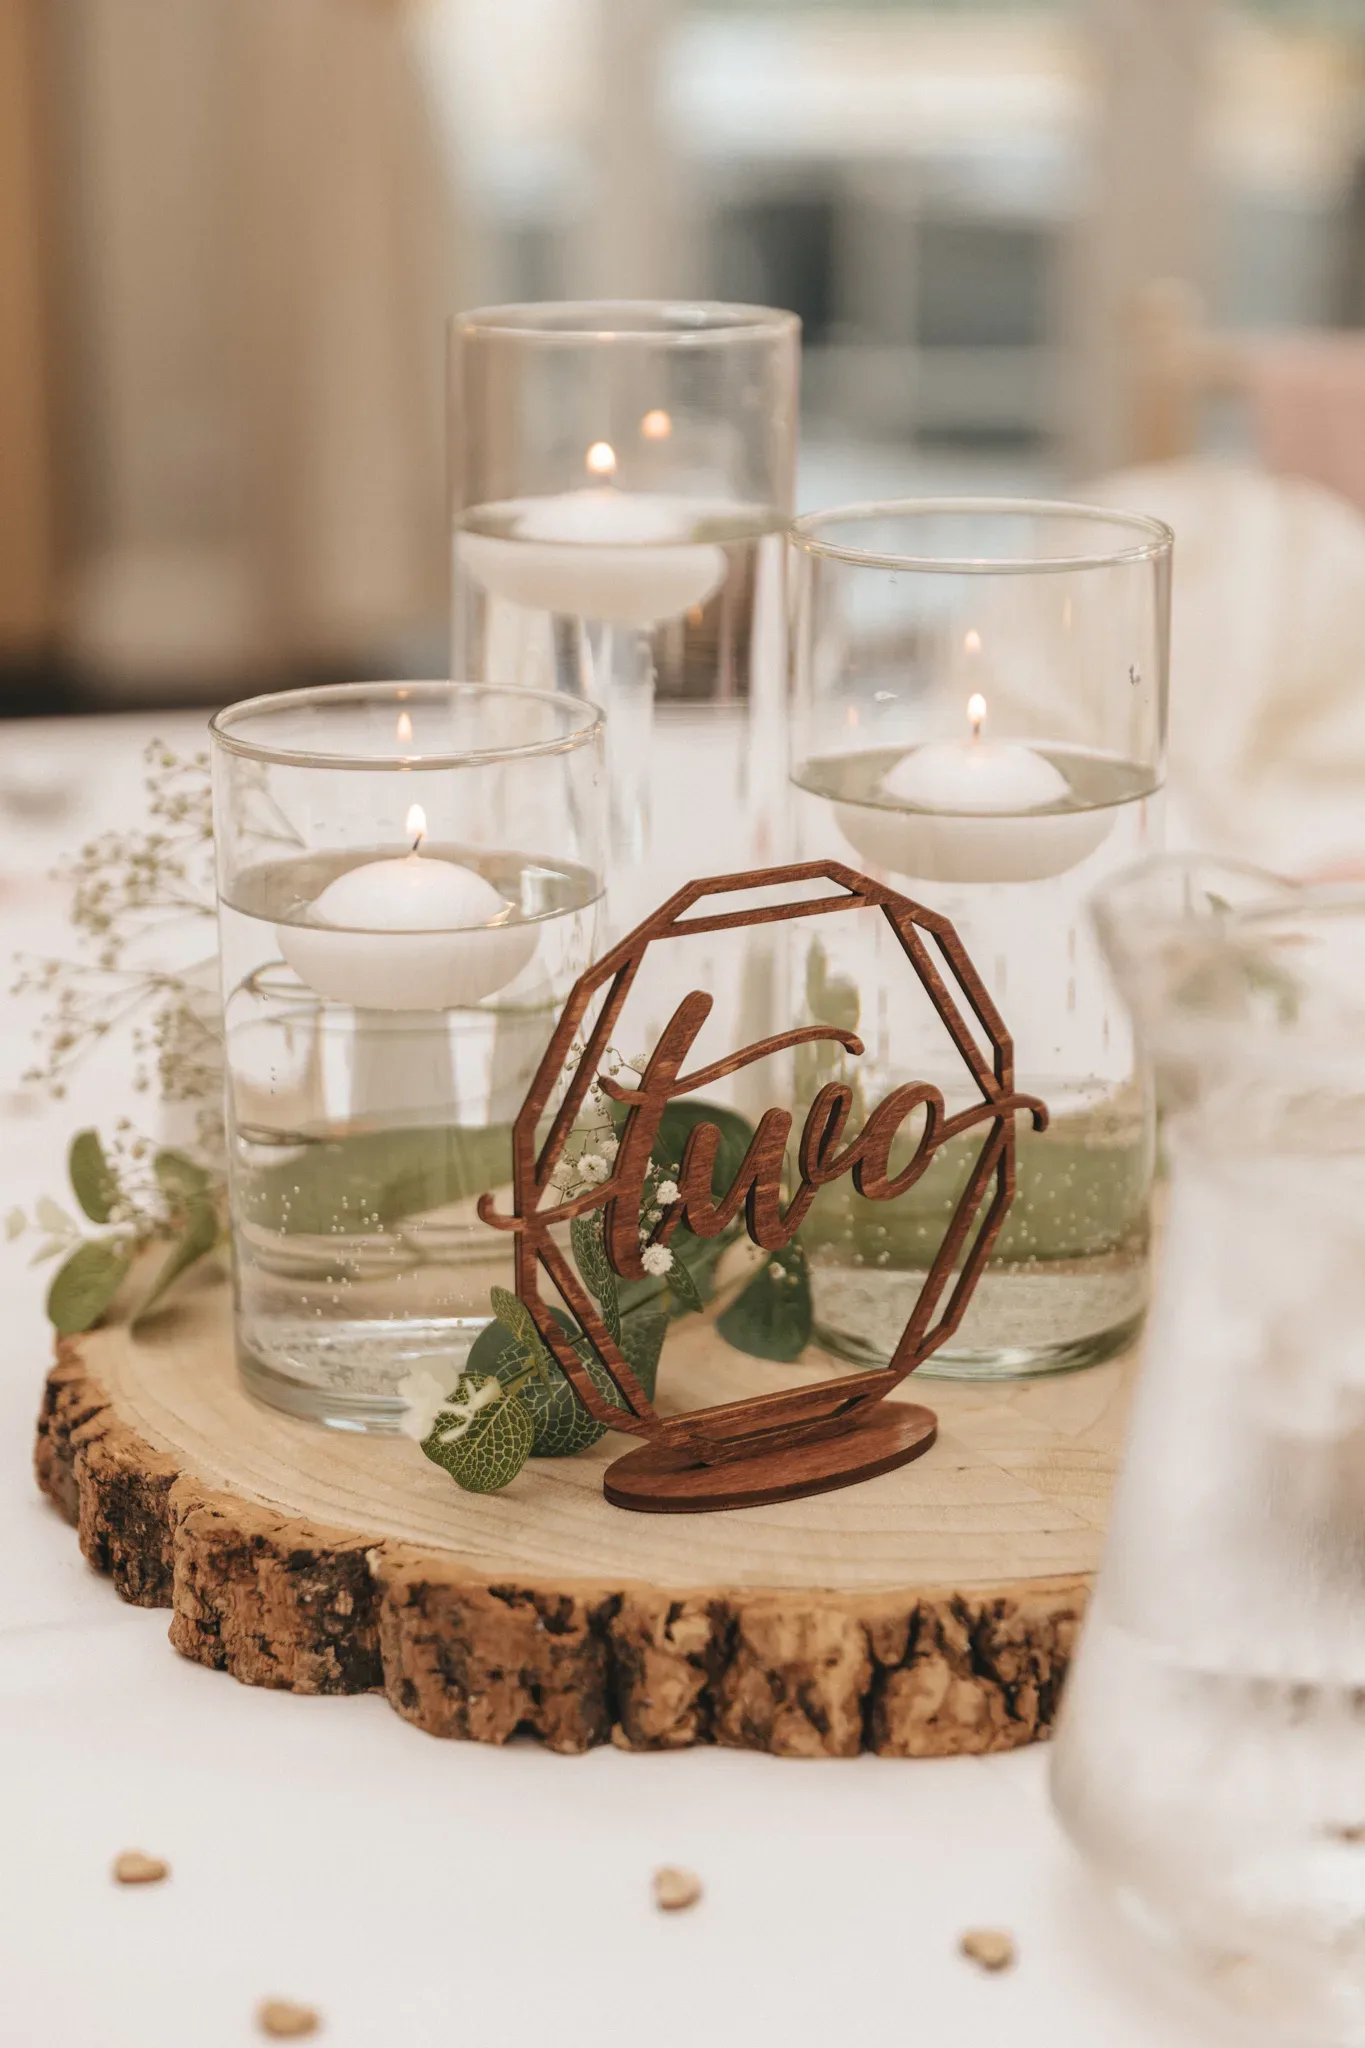 A rustic wedding table centerpiece featuring three glass votive candle holders with lit candles, set on a circular wooden slice. a decorative metal piece with the word "love" in script is centered among the candles, surrounded by small green leaves.